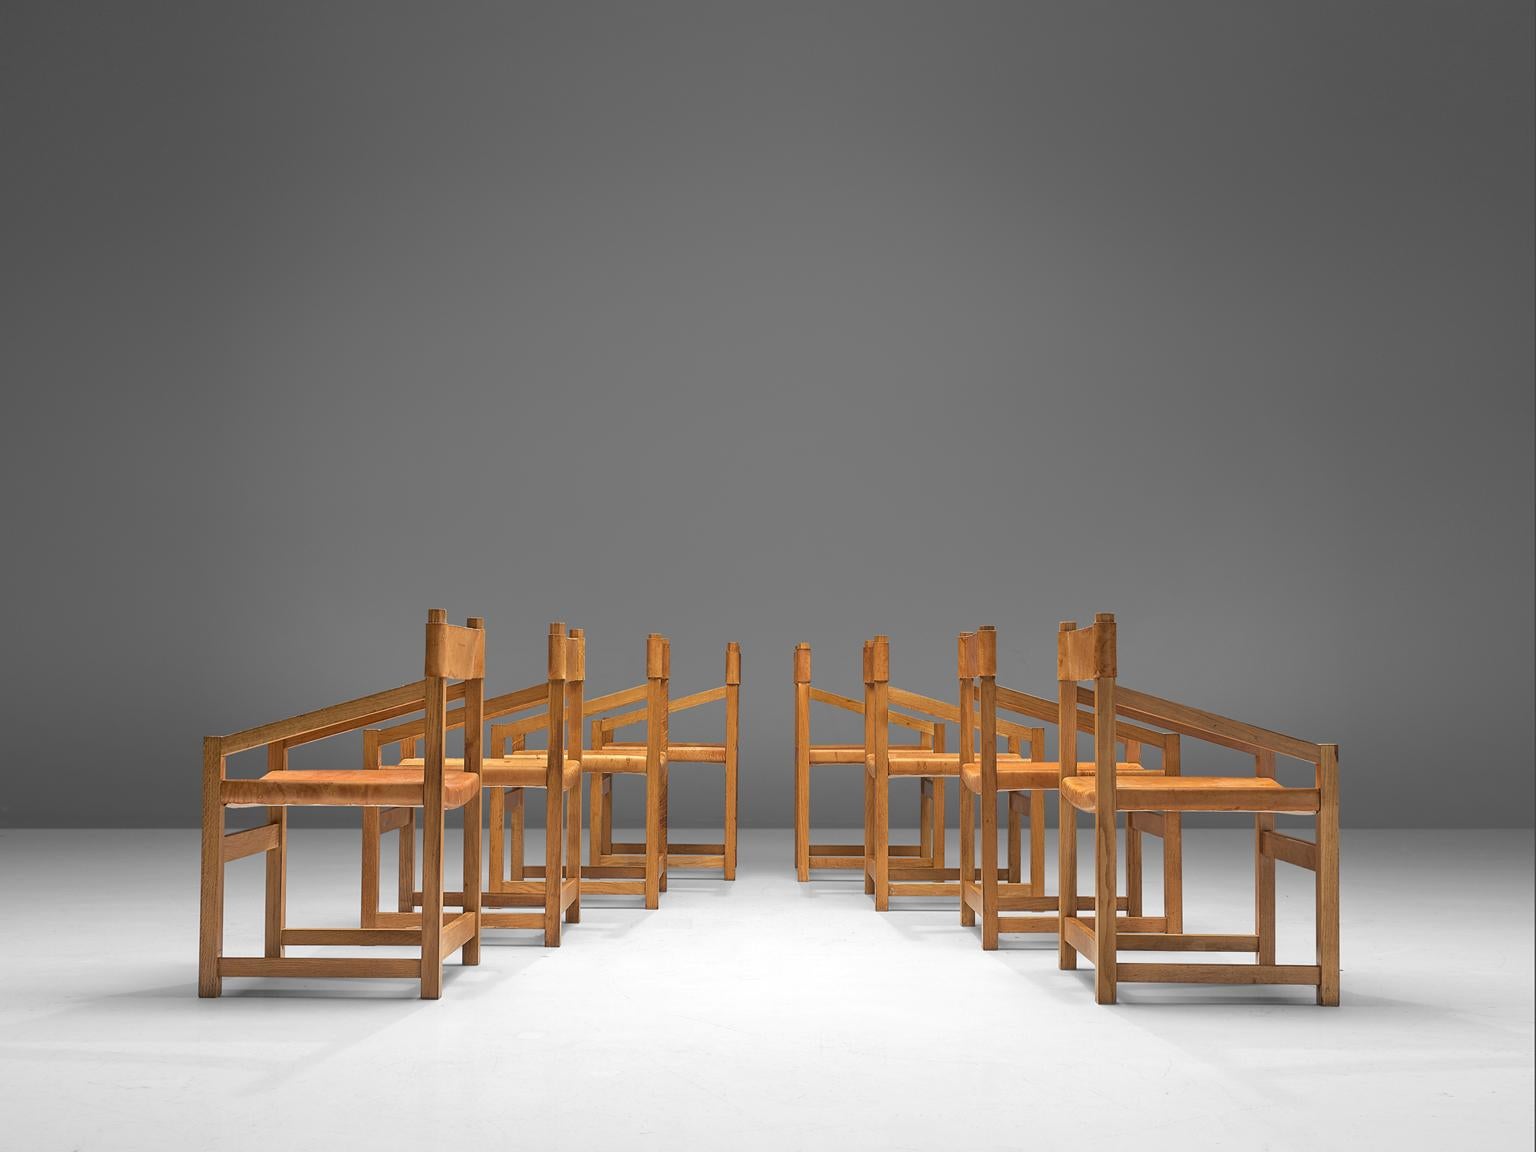 Jordi Casablanca Muntañola, set of 8 'S5' armchairs, pine and leather, Spain, 1979.

This set of eight armchairs from Spain is purist and modest. The chairs feature an architectural frame, of which the combination with diagonal armrests is striking.